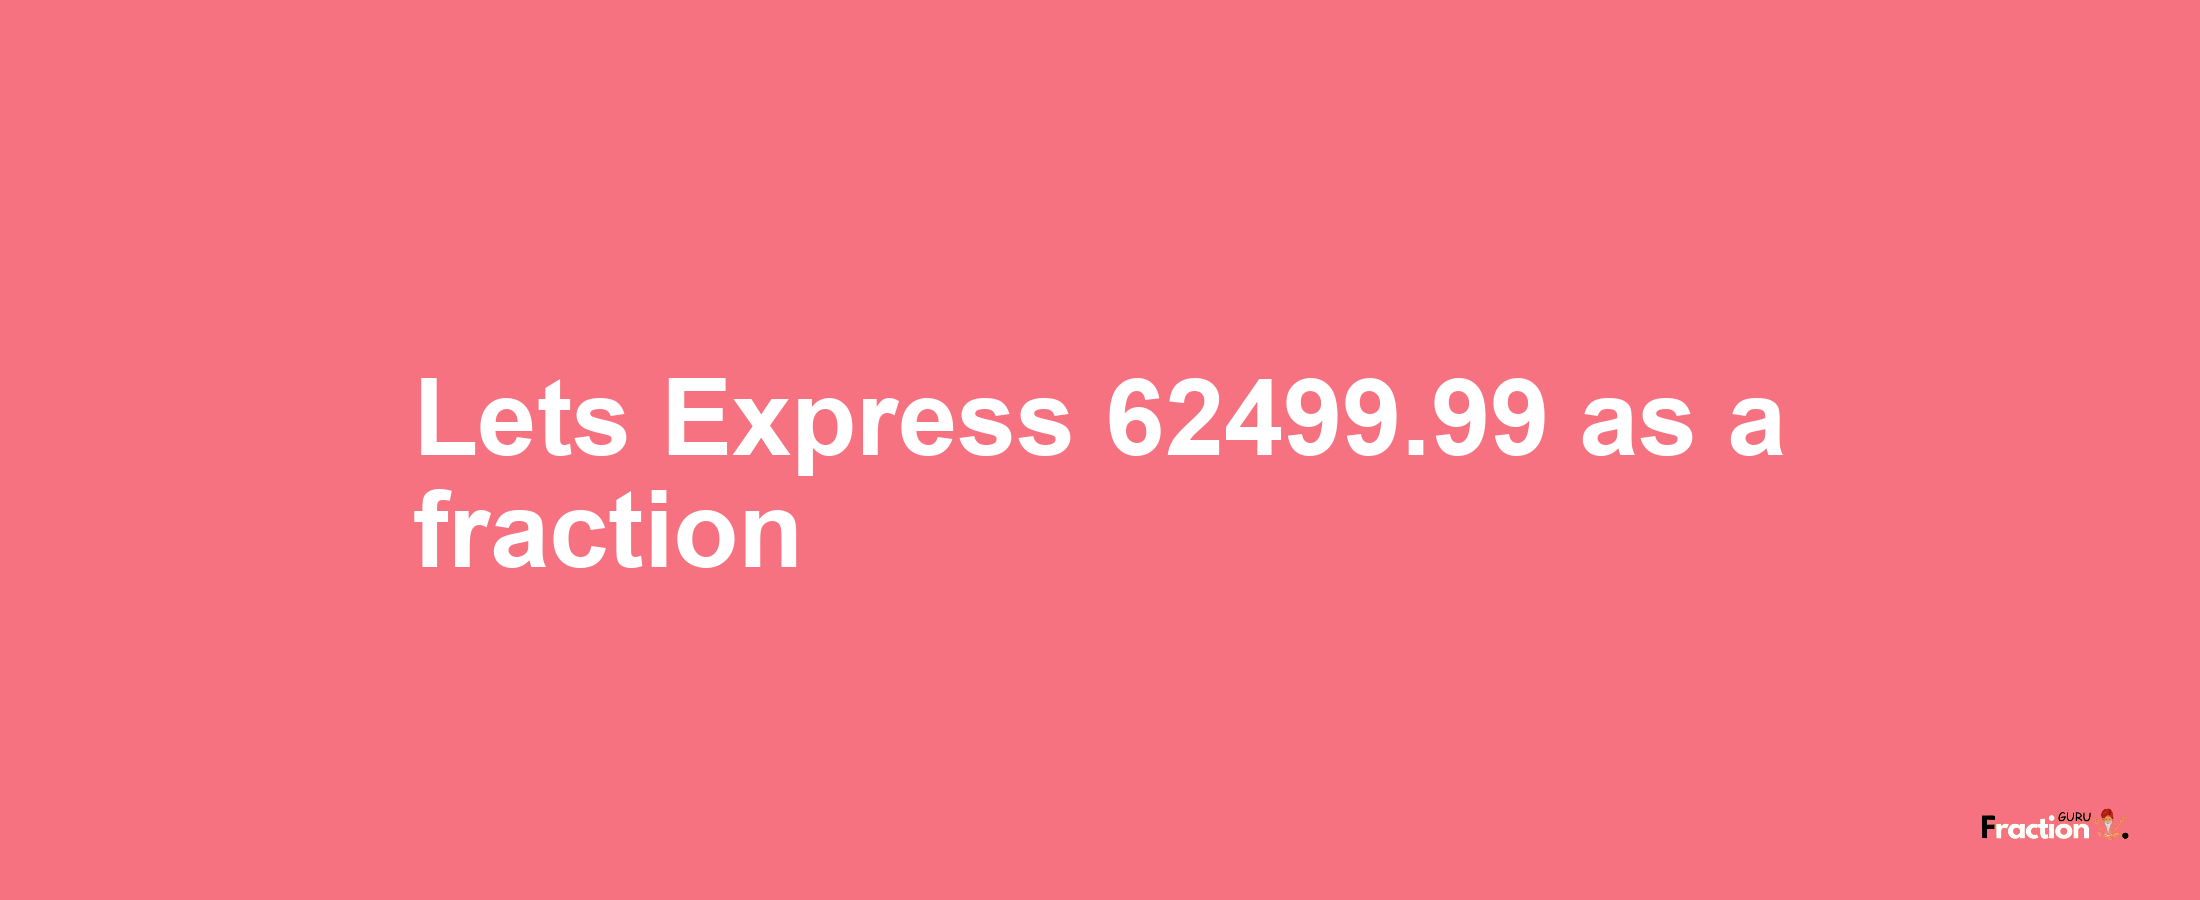 Lets Express 62499.99 as afraction